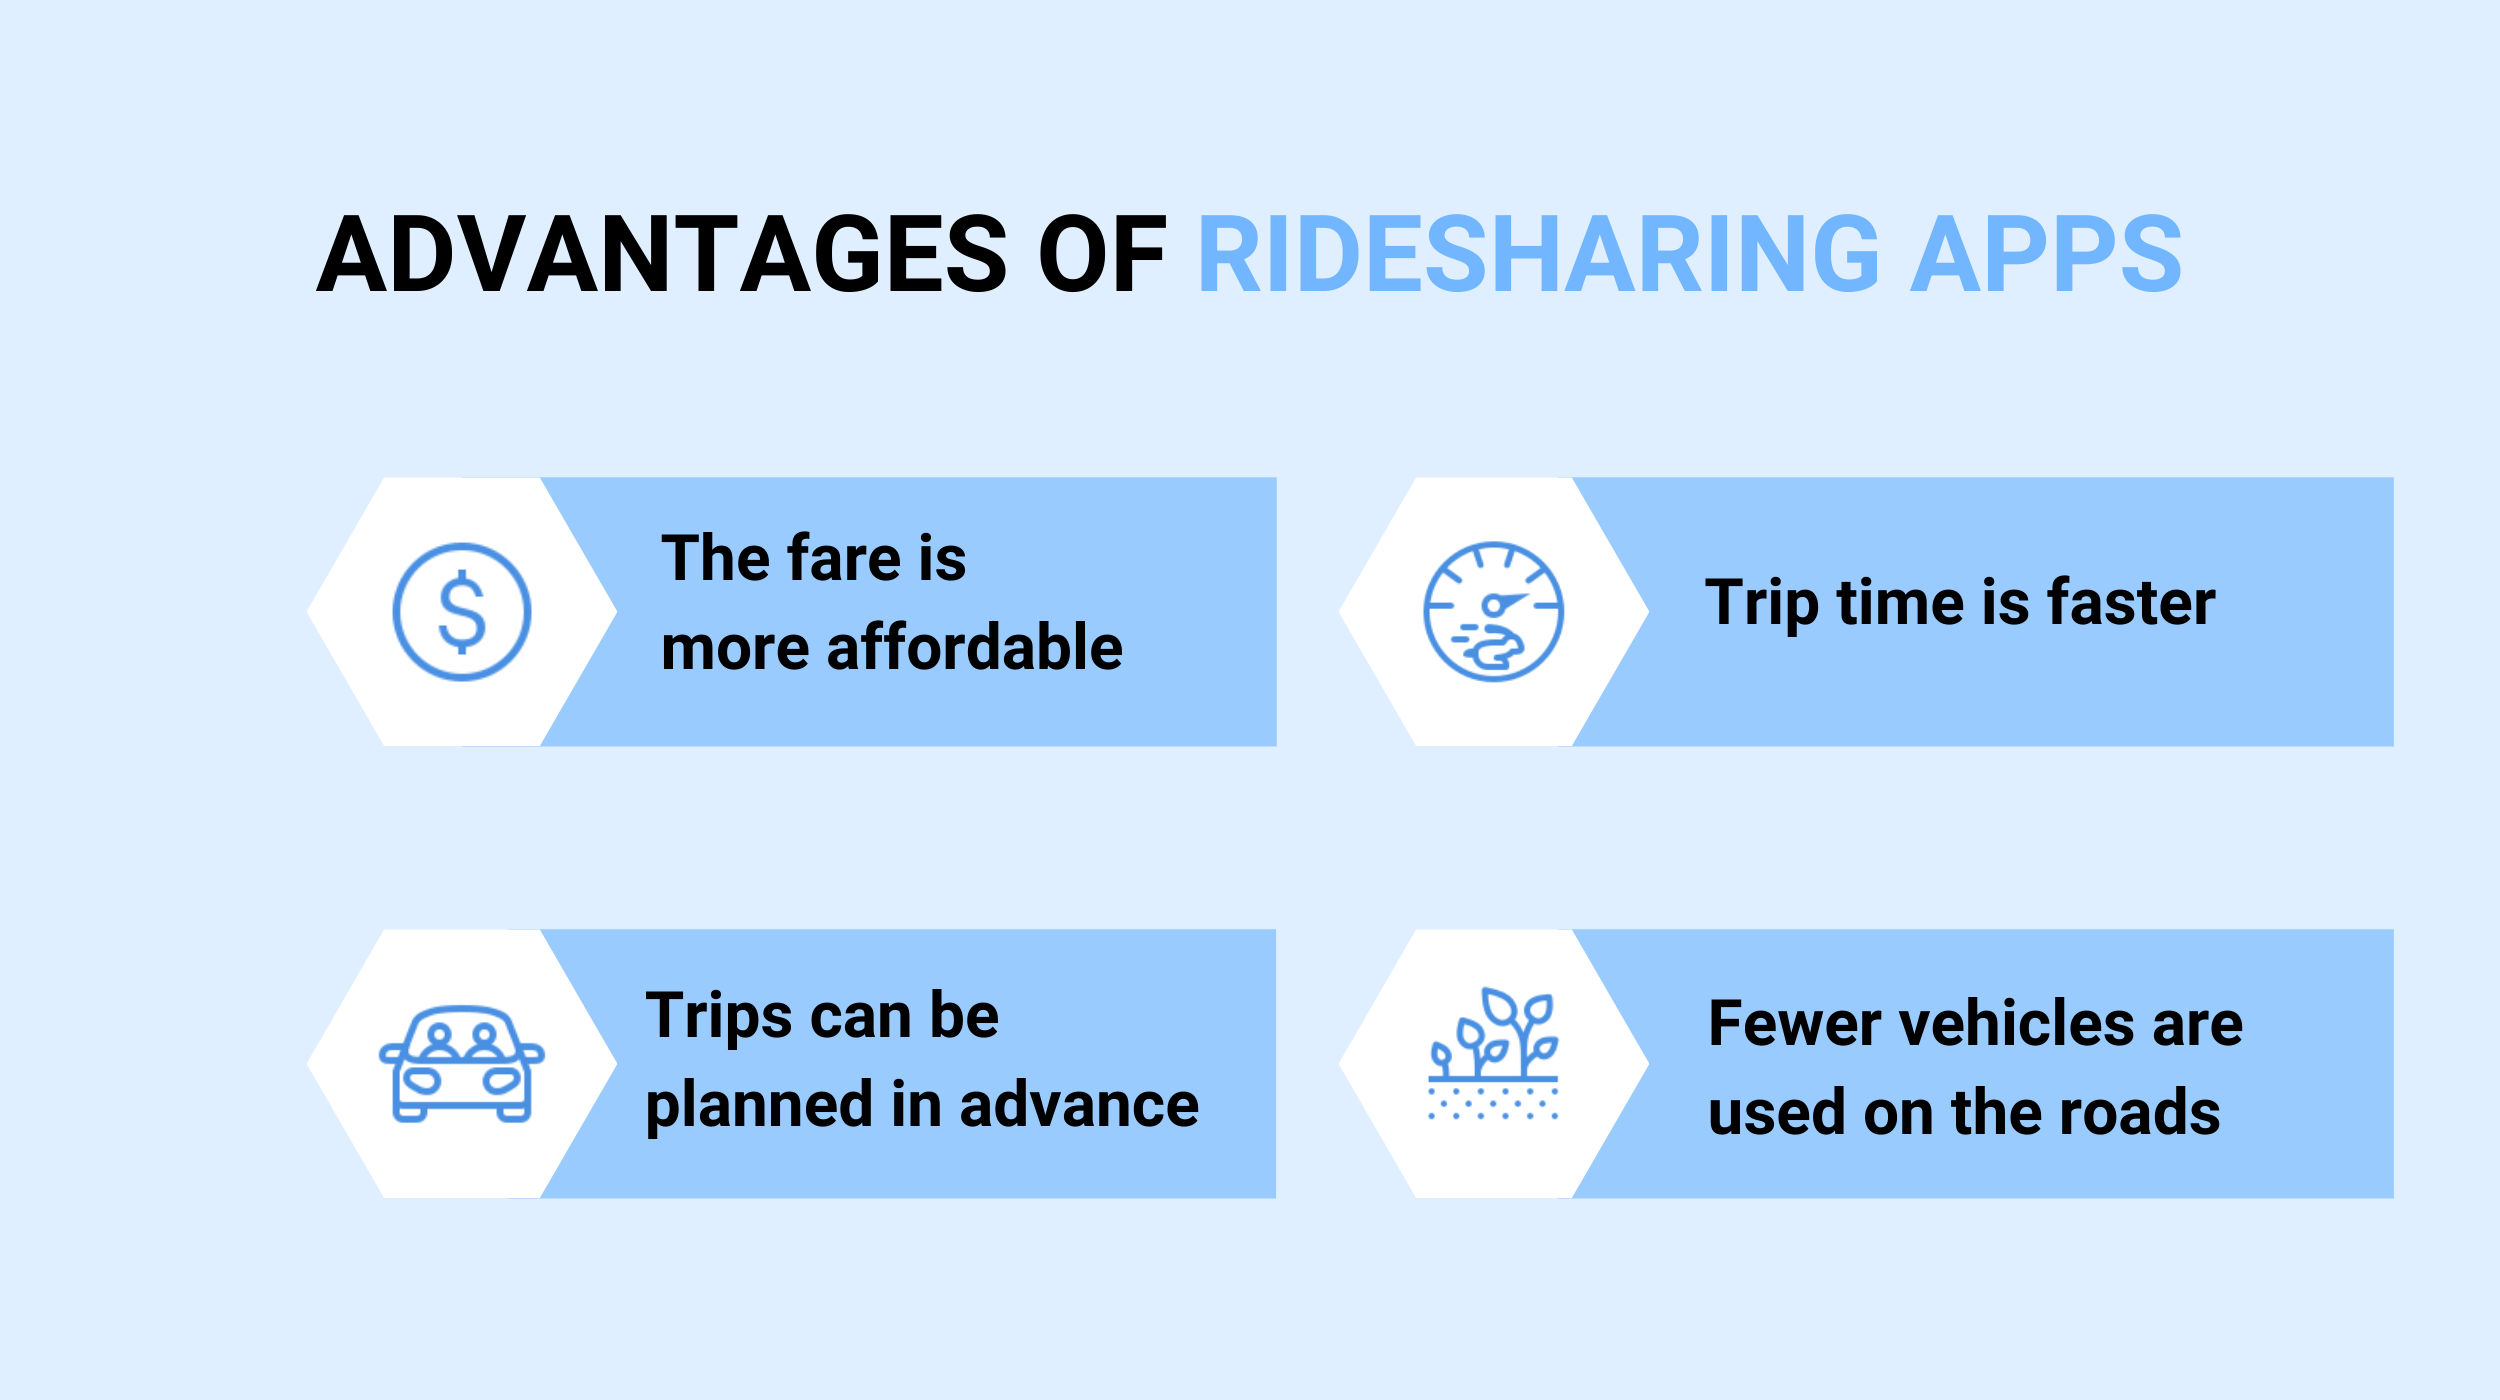 Advantages of ridesharing apps